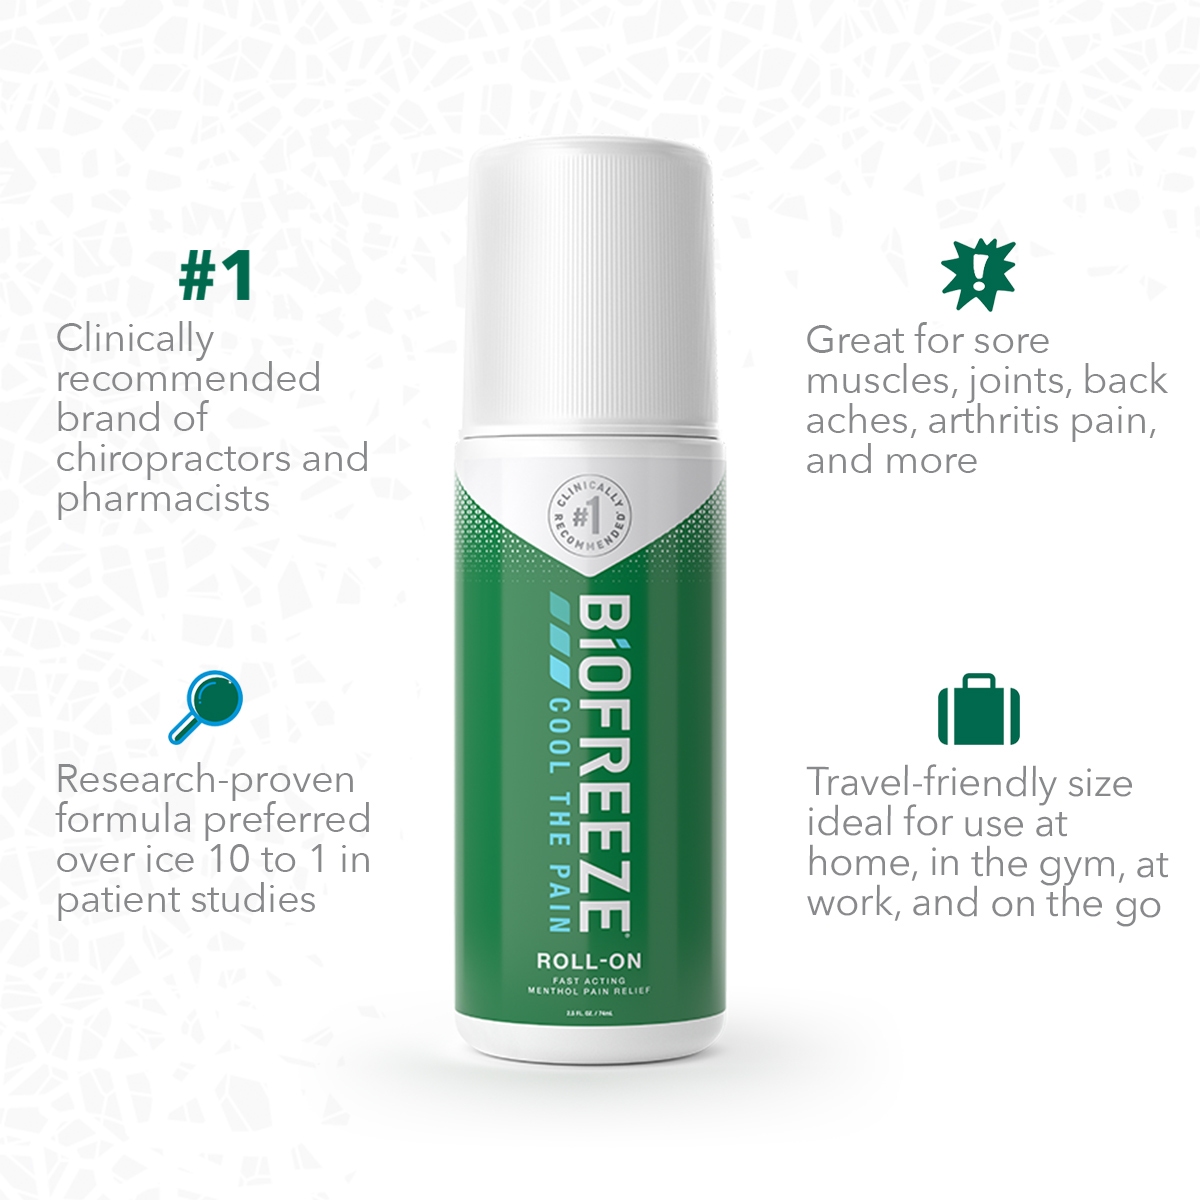 3 different Biofreeze products for fast acting pain relief: spray bottle, squeeze bottle & roll-on.